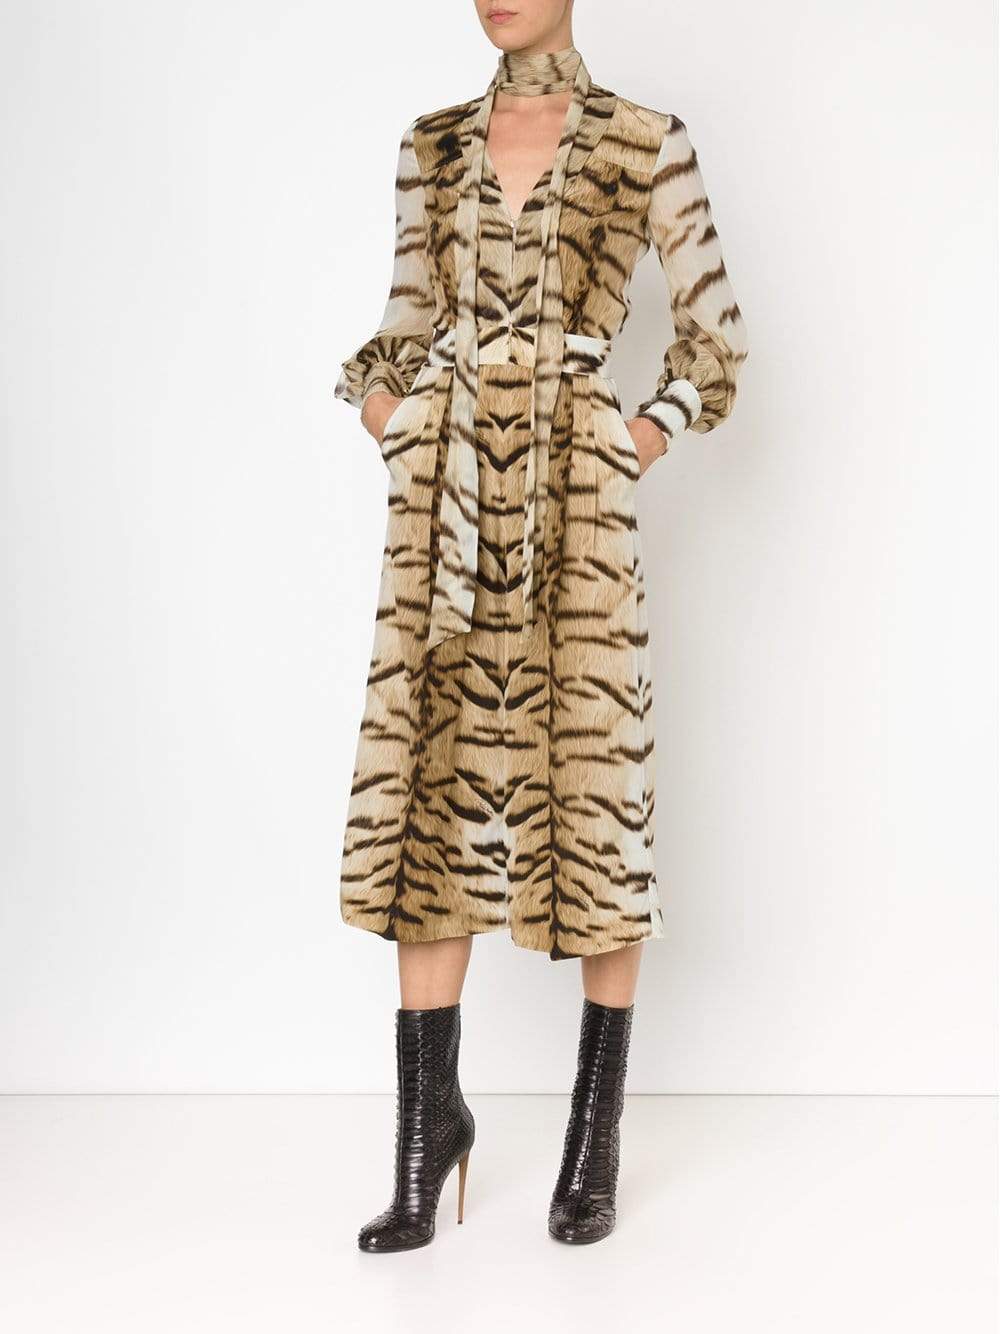 ROBERTO CAVALLI-Tiger Coulotte Jumpsuit-